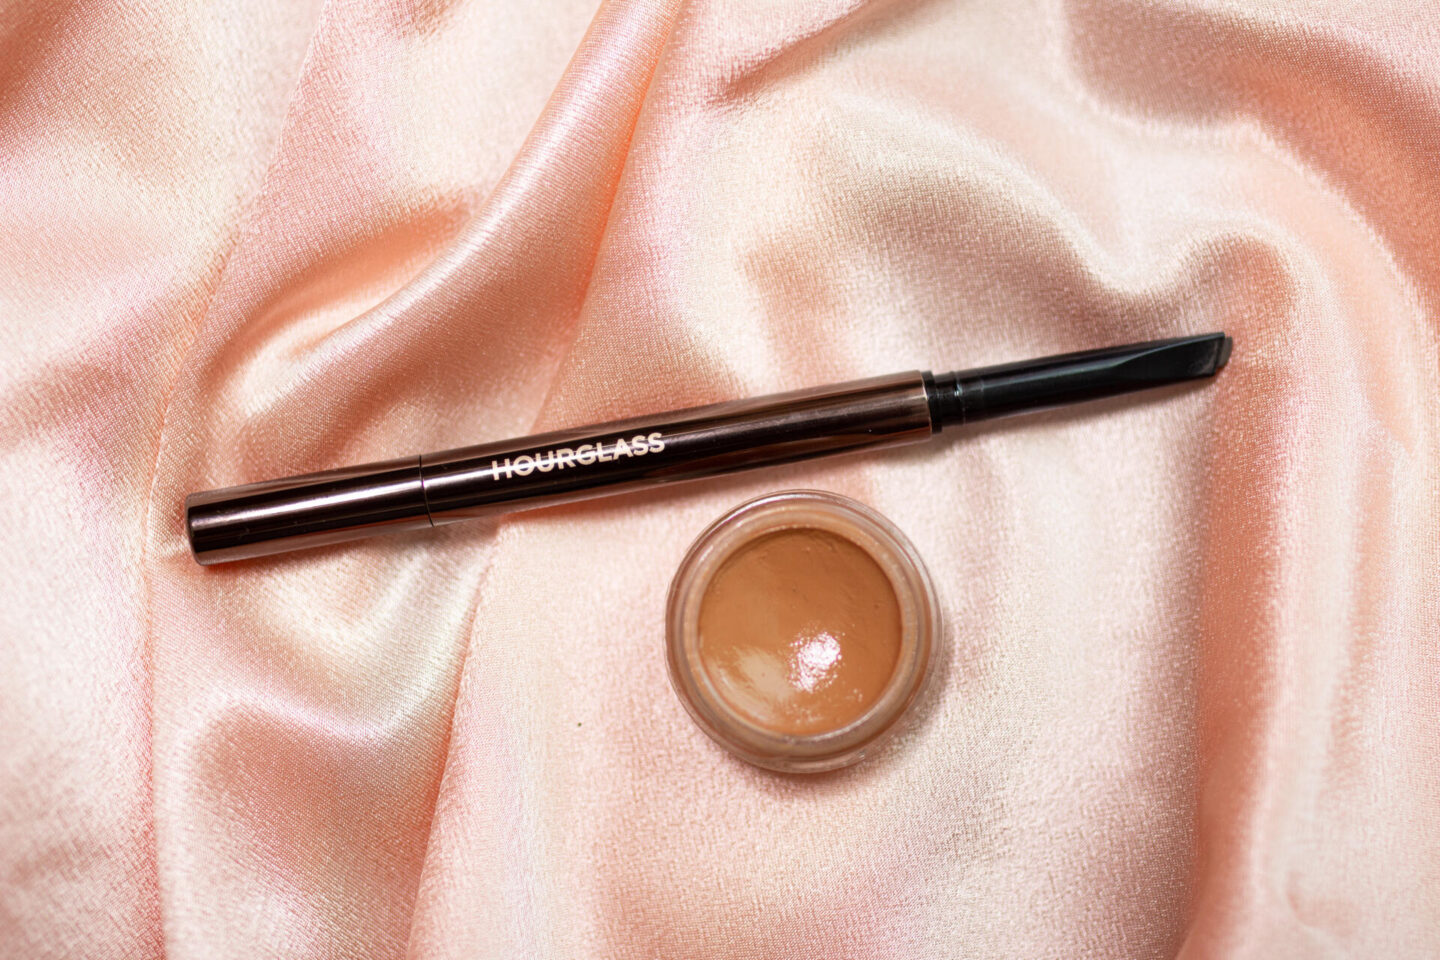 Hourglass Arch Brow Sculpting Pencil & Glossier Stretch Concealer July 2020 Beauty Favorites